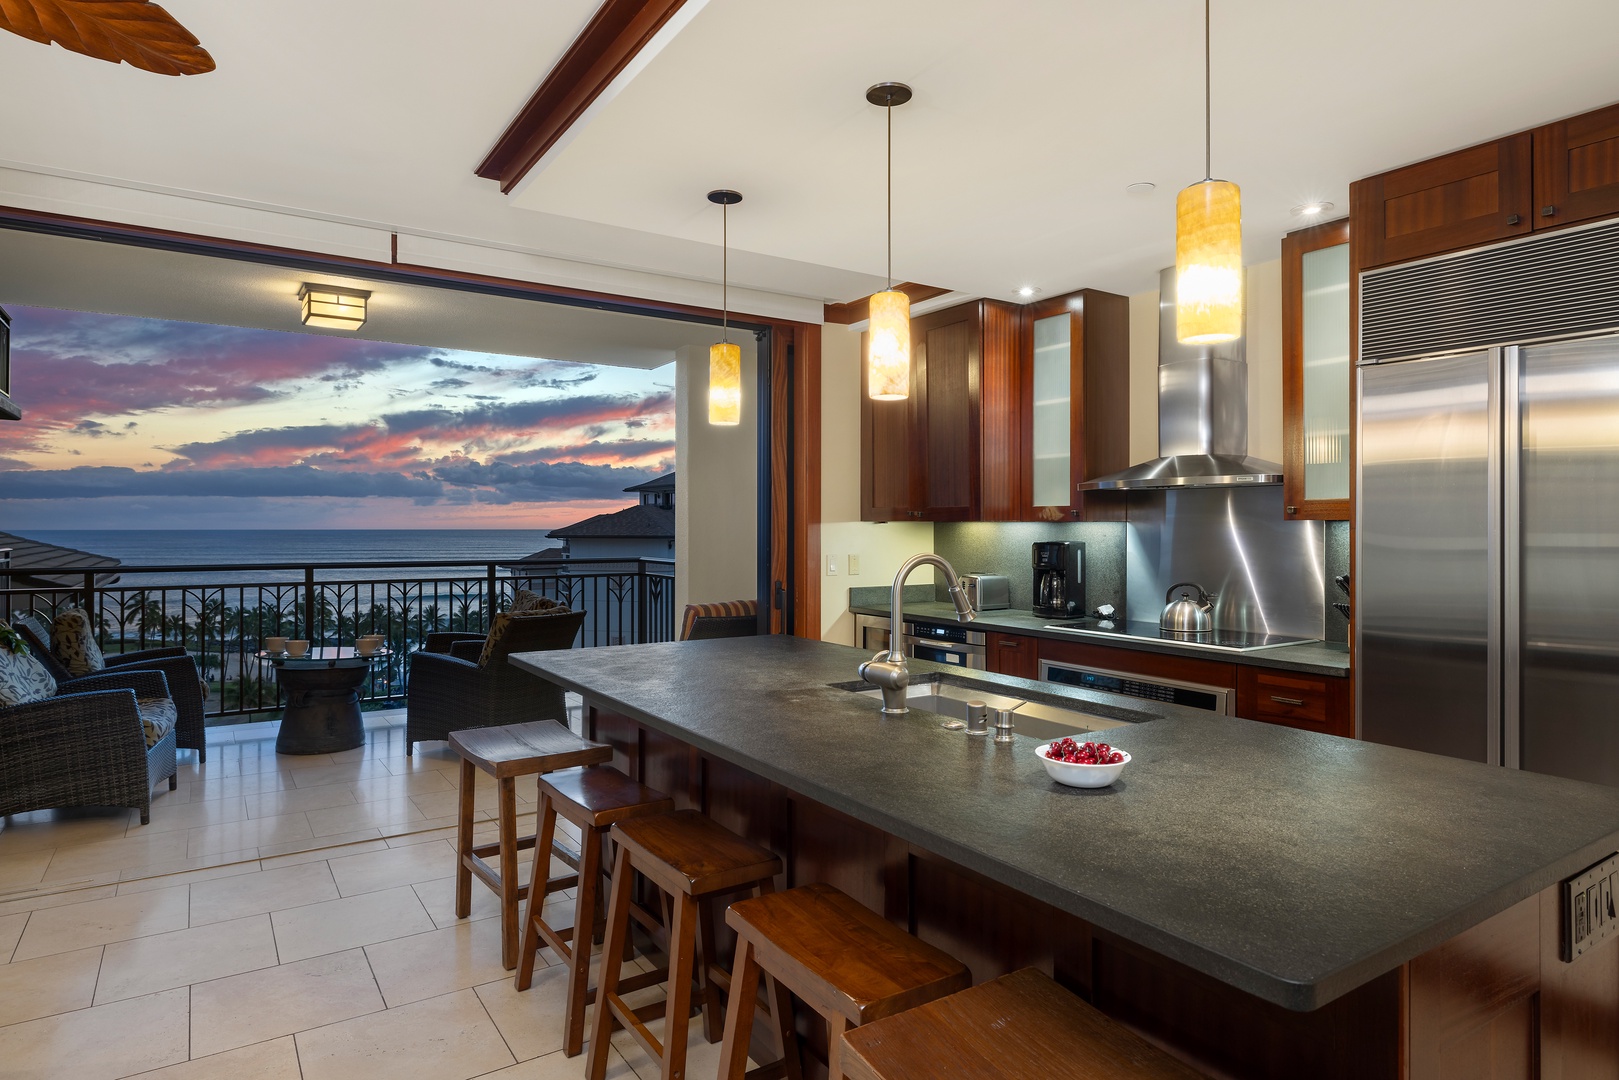 Kapolei Vacation Rentals, Ko Olina Beach Villas O1006 - An open kitchen with stainless steel appliances and bar seating.